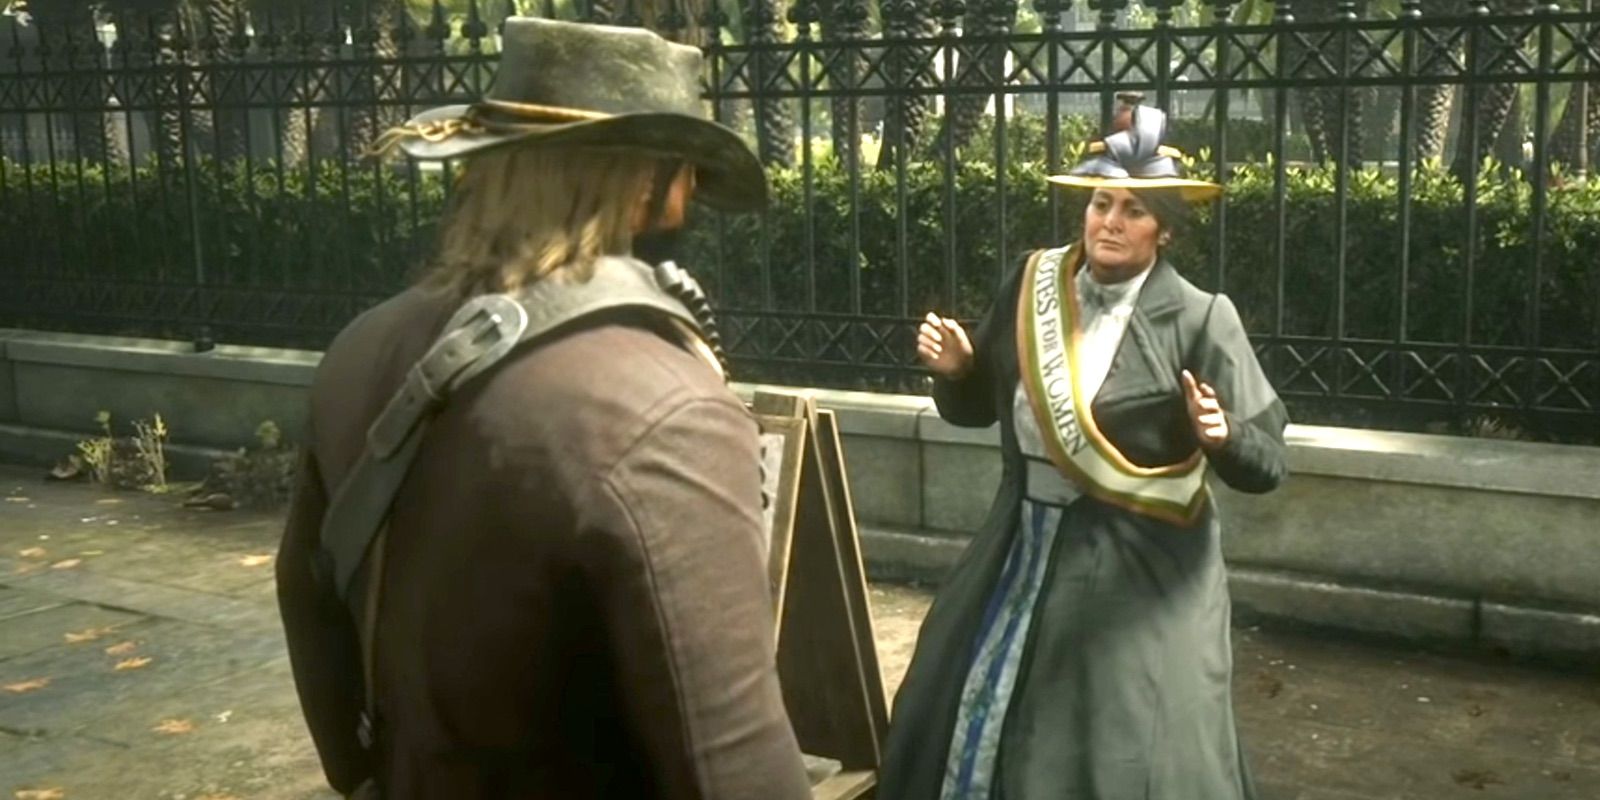 A women's suffrage campaigner in Red Dead Redemption 2